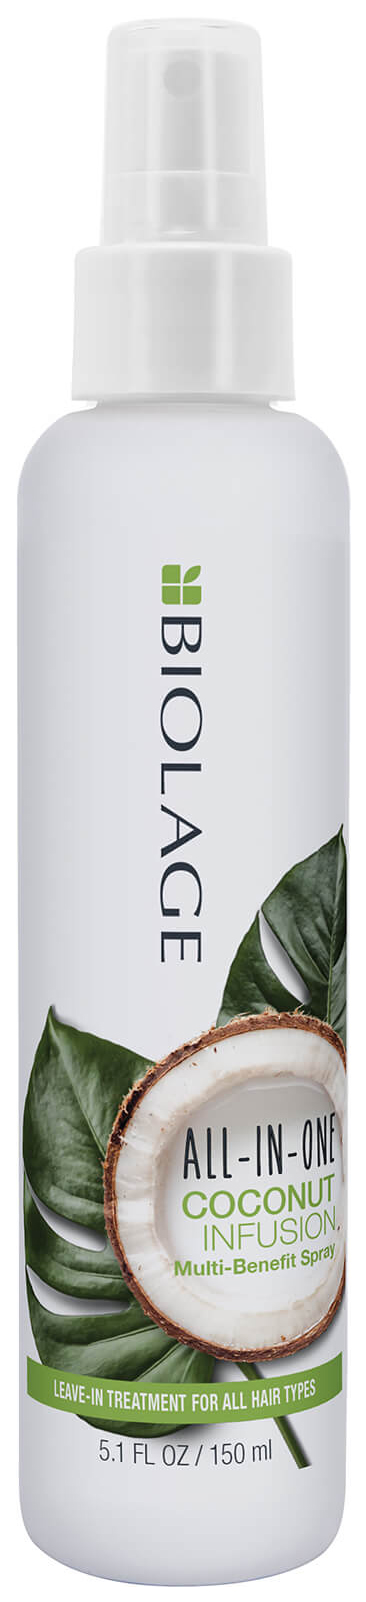 Спрей для волос Biolage All-In-One Coconut Infusion Multi-Benefit Spray 150 мл aeolus veterinary multi functional infusion severe simple surgical cart